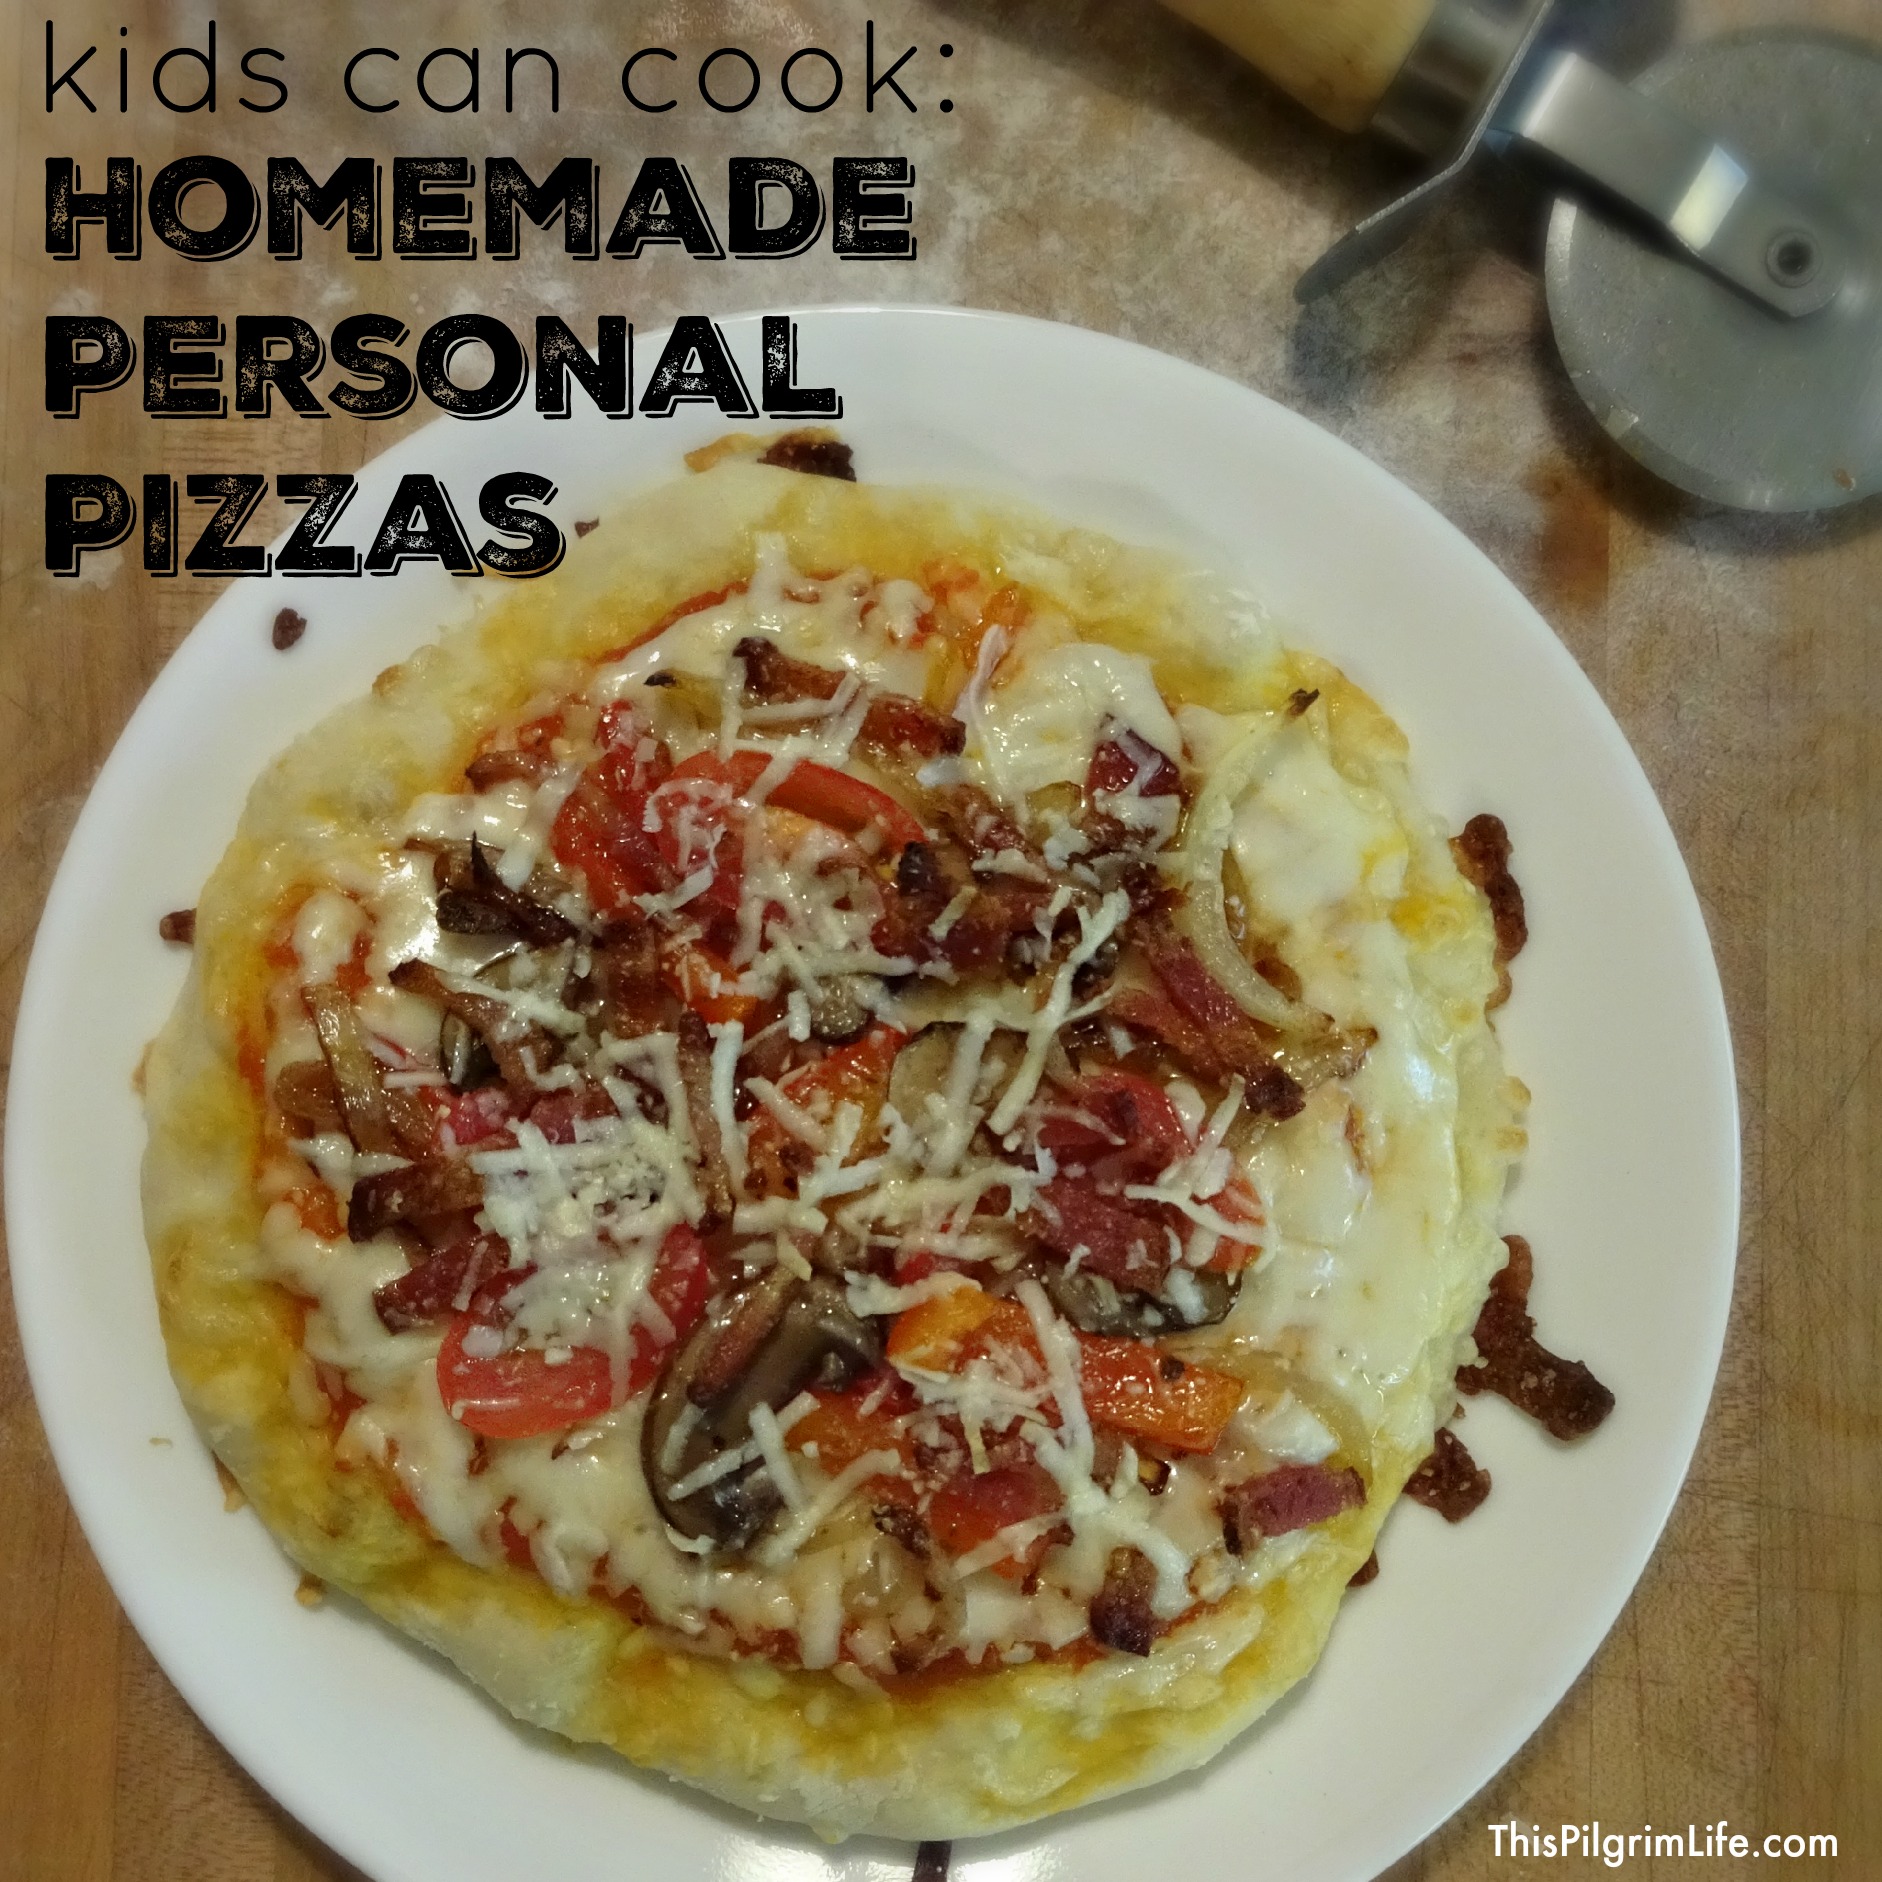 Making personal homemade pizzas is a great (and delicious) way to get kids involved in the kitchen! Check out these tips and a recipe for a no-fail dough. 